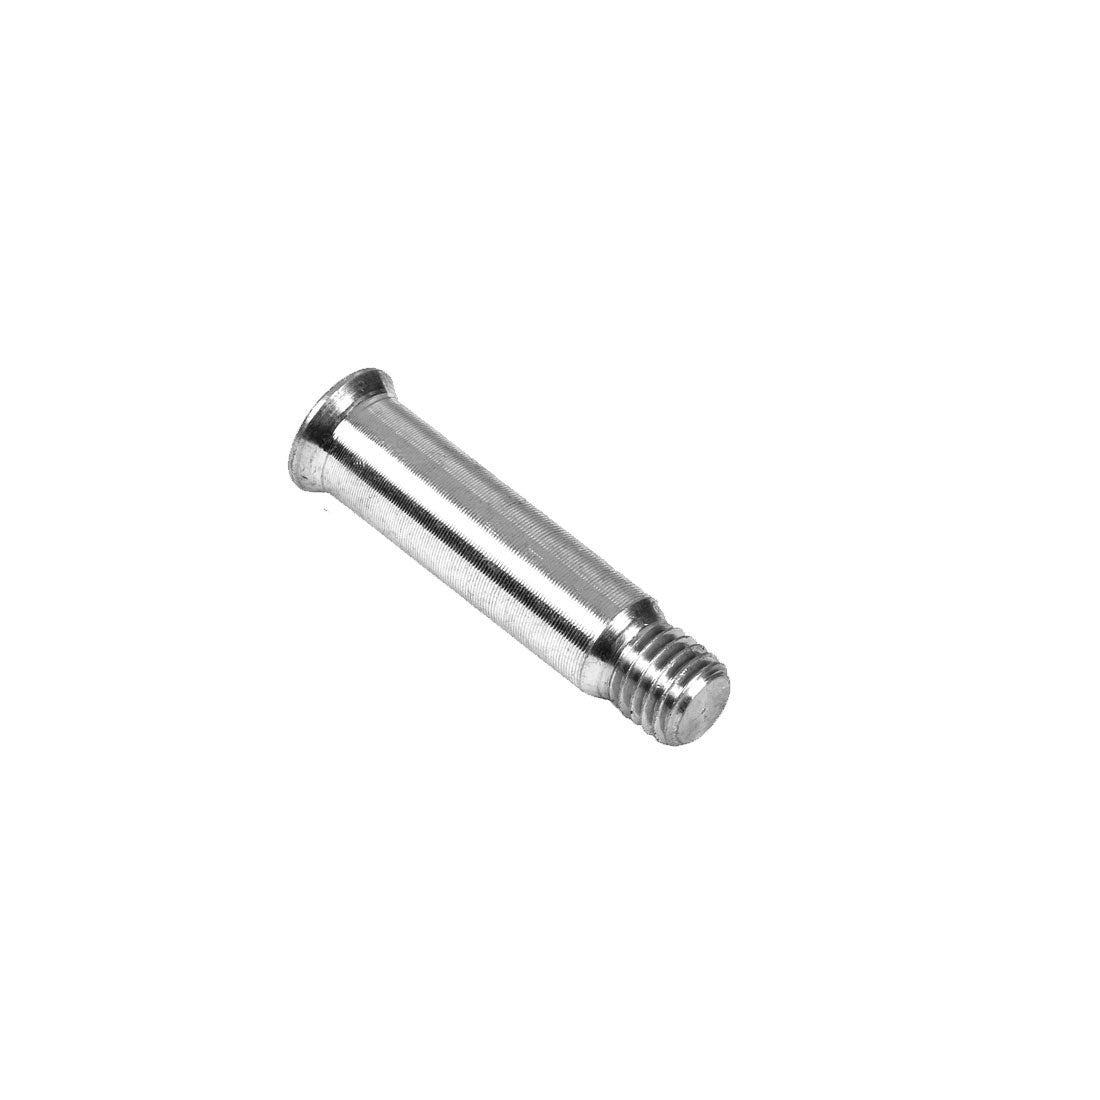 Powerslide Axle Hex 36mm/8mm - Single Inline Hardware and Parts